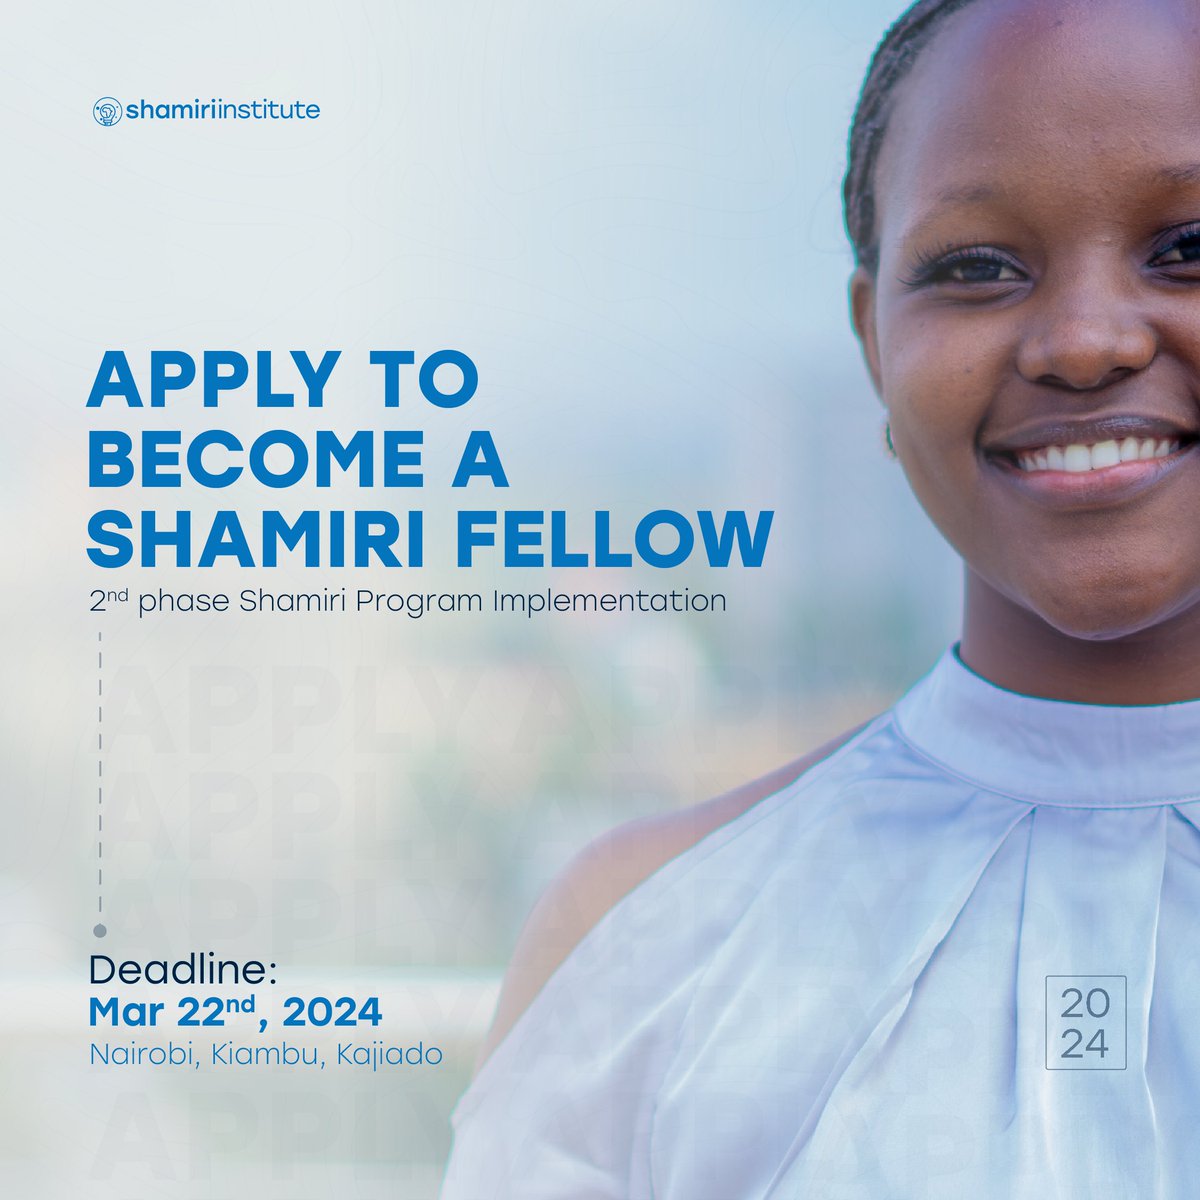 Current mood: ready for #ShamiriFellows 🥁 Are you aged between 18-22 years and based in #Nairobi, #Kiambu or #Kajiado County? We are looking for you! Apply before 22nd Mar 2024 shamiri.applytojob.com/apply